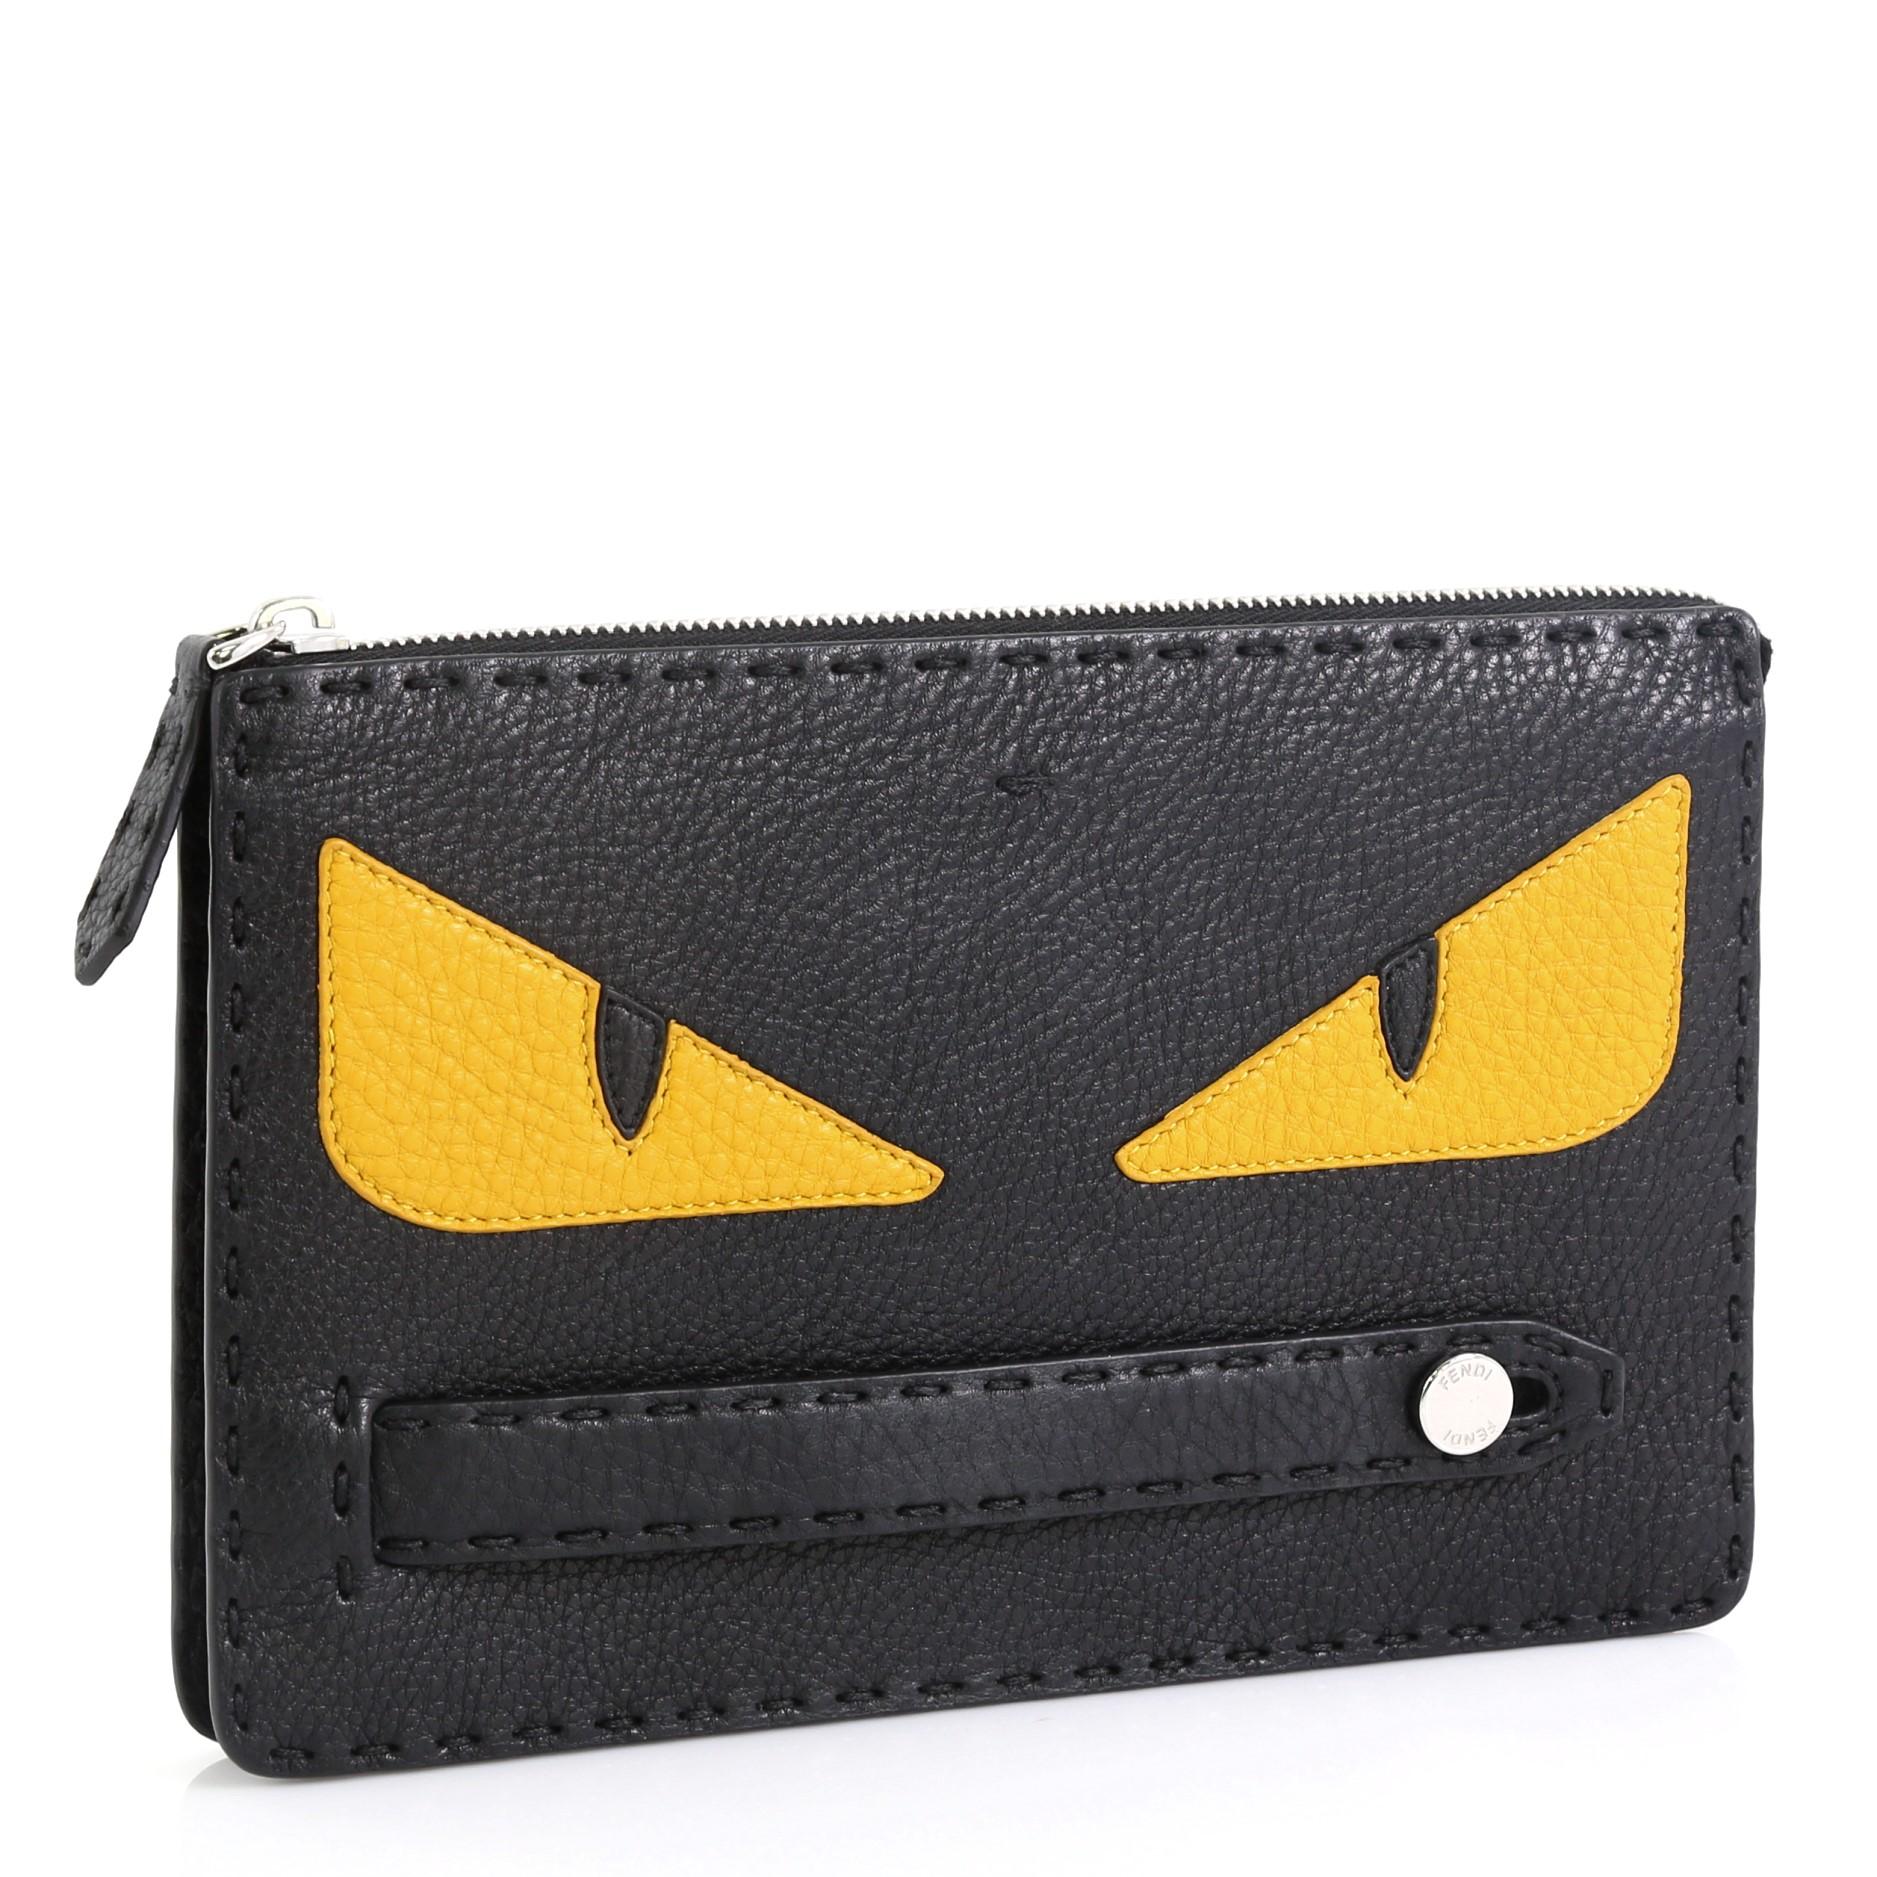 This Fendi Monster Clutch Selleria Leather Small, crafted from black and yellow leather, features a leather handle strap, Fendi's monster design, and silver-tone hardware. Its zip closure opens to a black fabric and leather interior with multiple